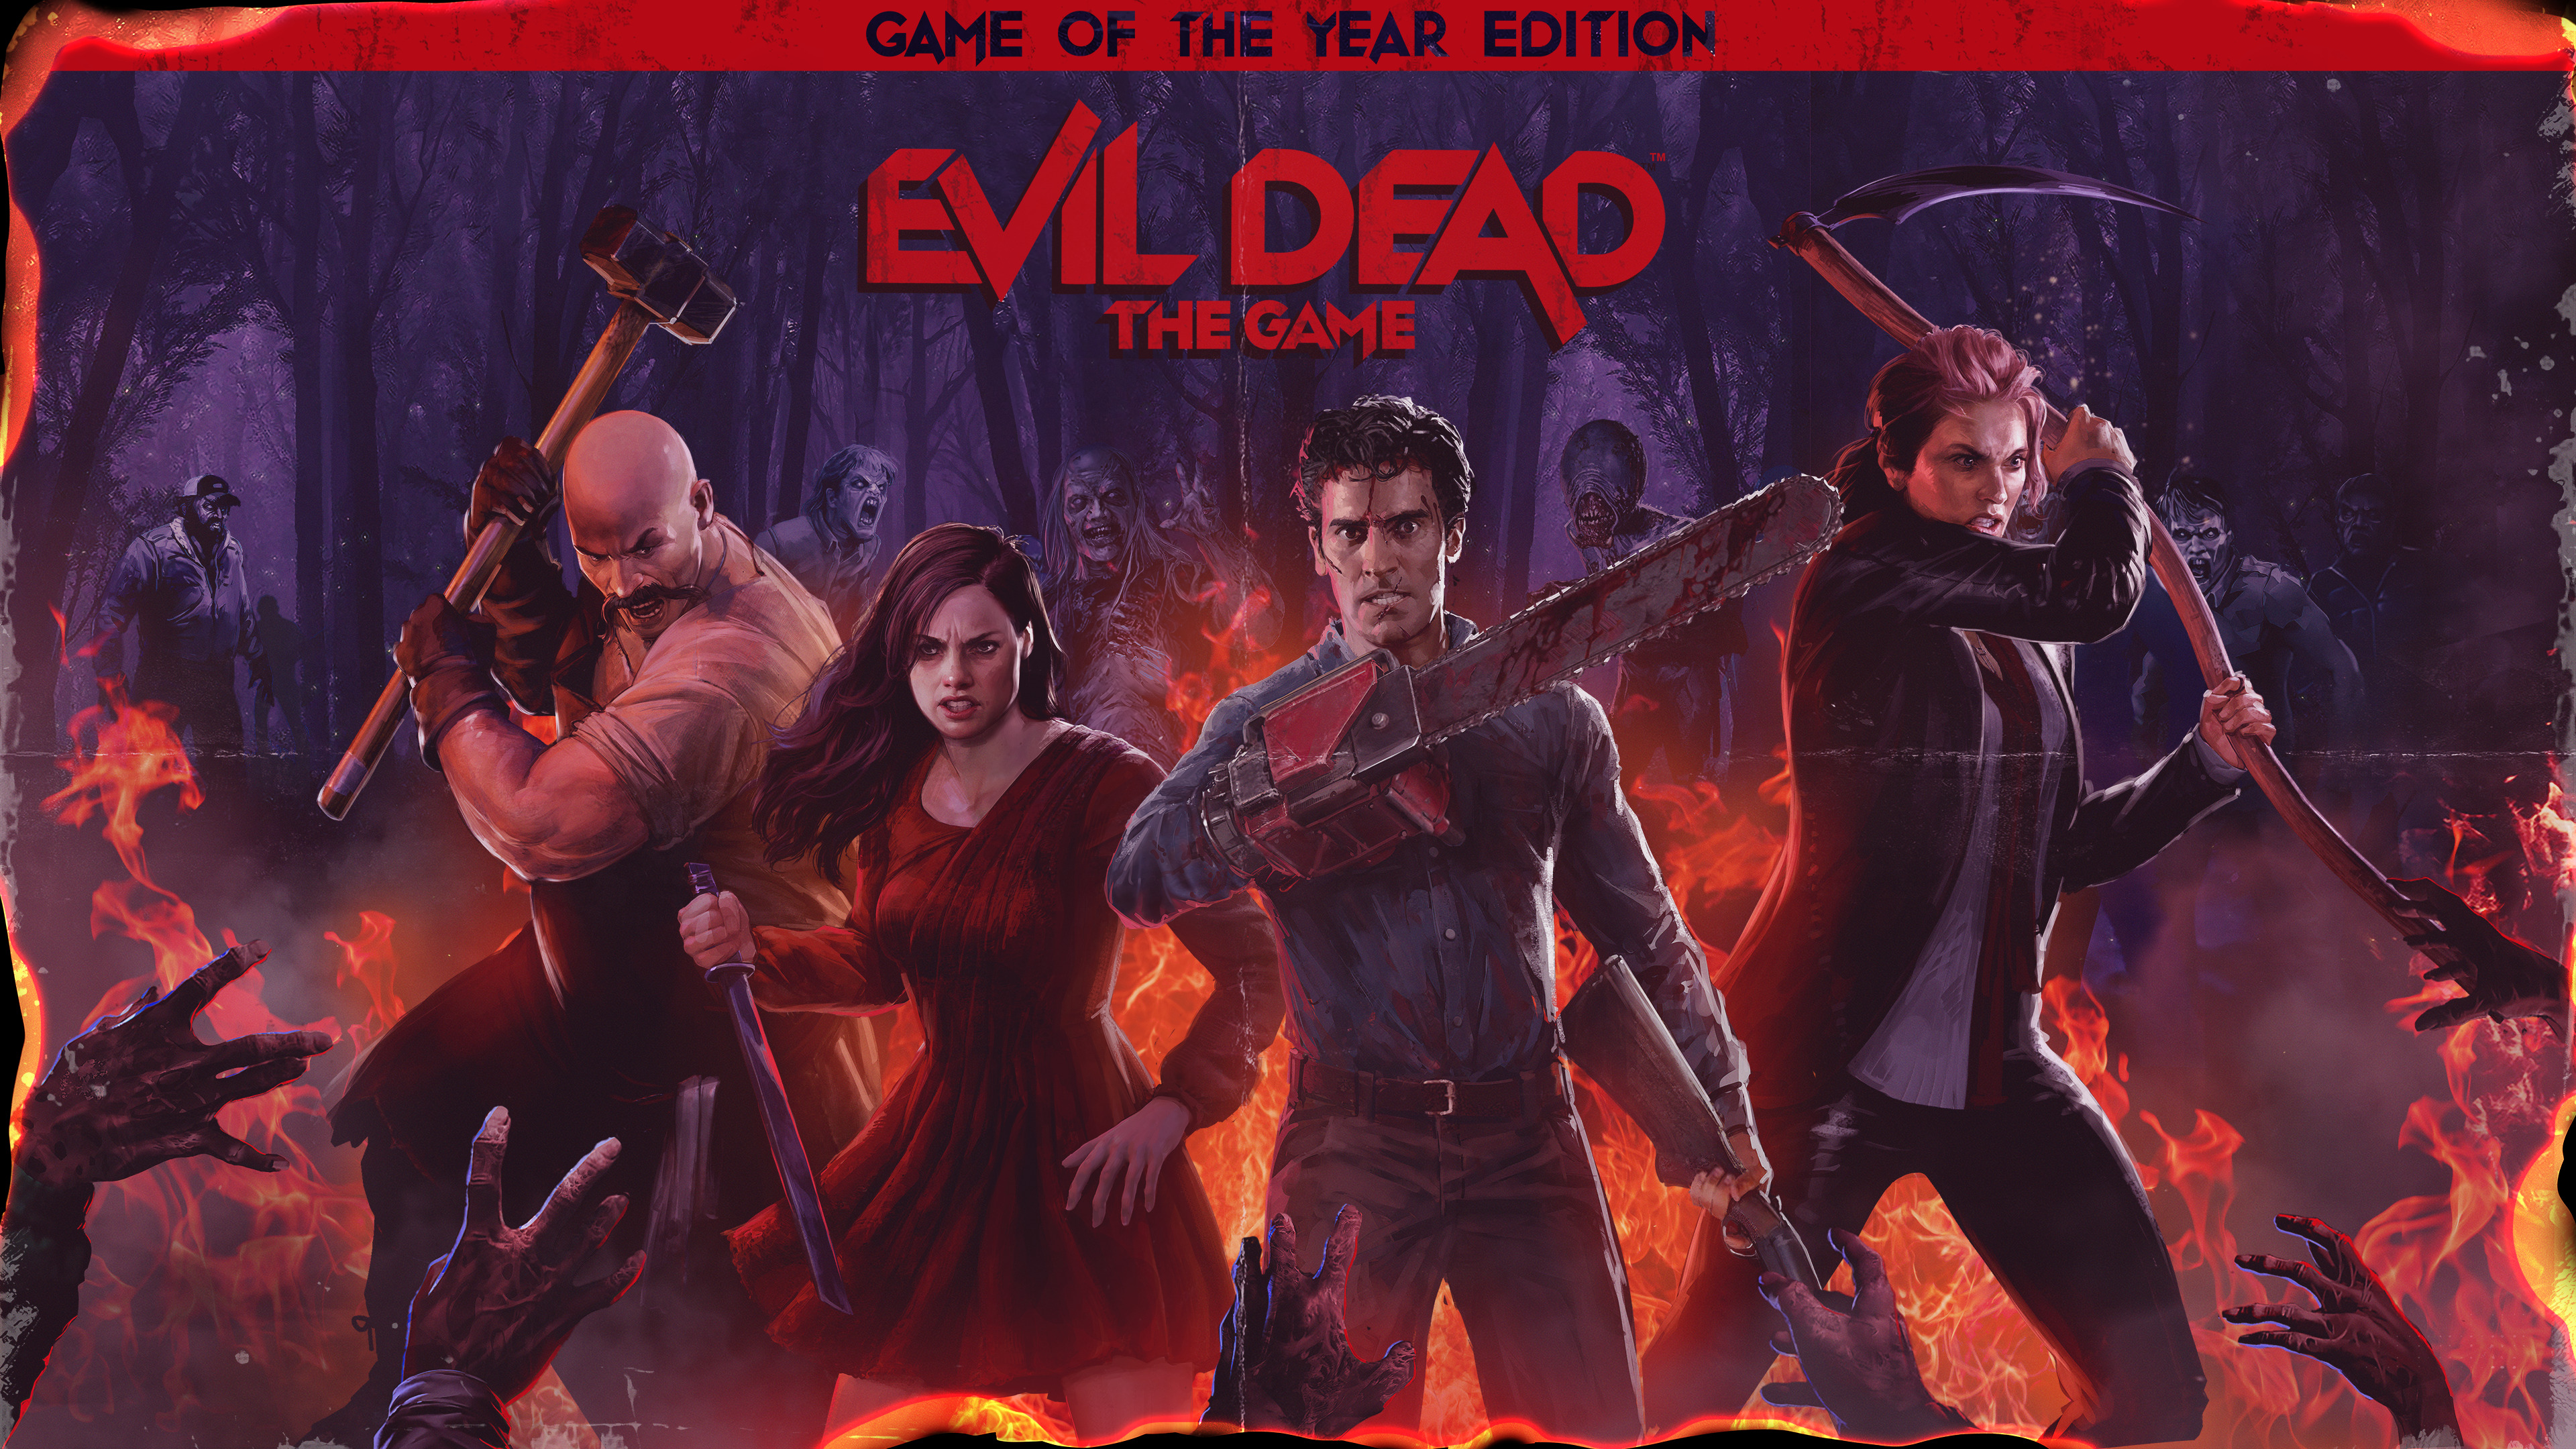 AmiAmi [Character & Hobby Shop]  PS4 Evil Dead: The Game(Released)